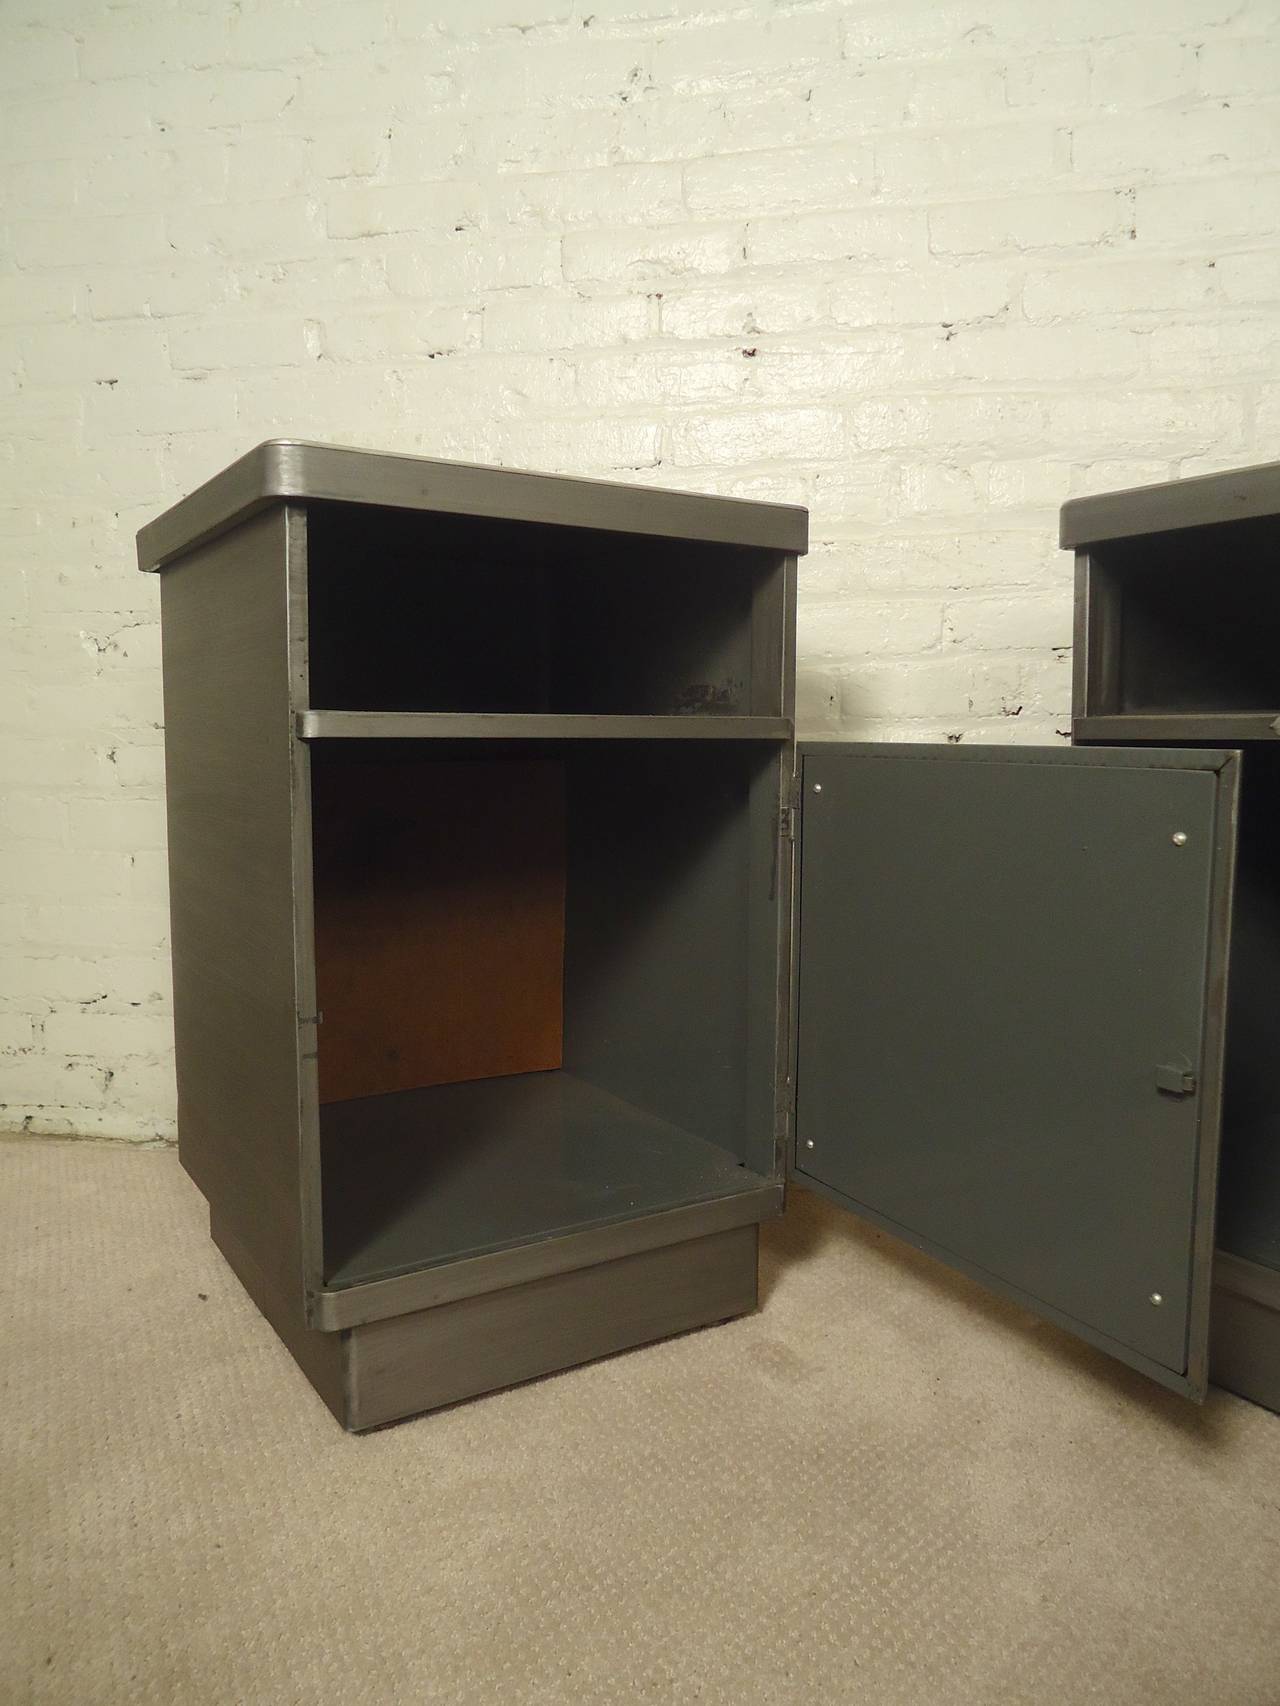 Vintage metal cabinets have been restored in a striking bare metal style finish. Original tops, top open cabinet and large cabinet space with door. Great for use as sofa tables or nightstands.
Listing is for single unit - only 1 available.

(Please